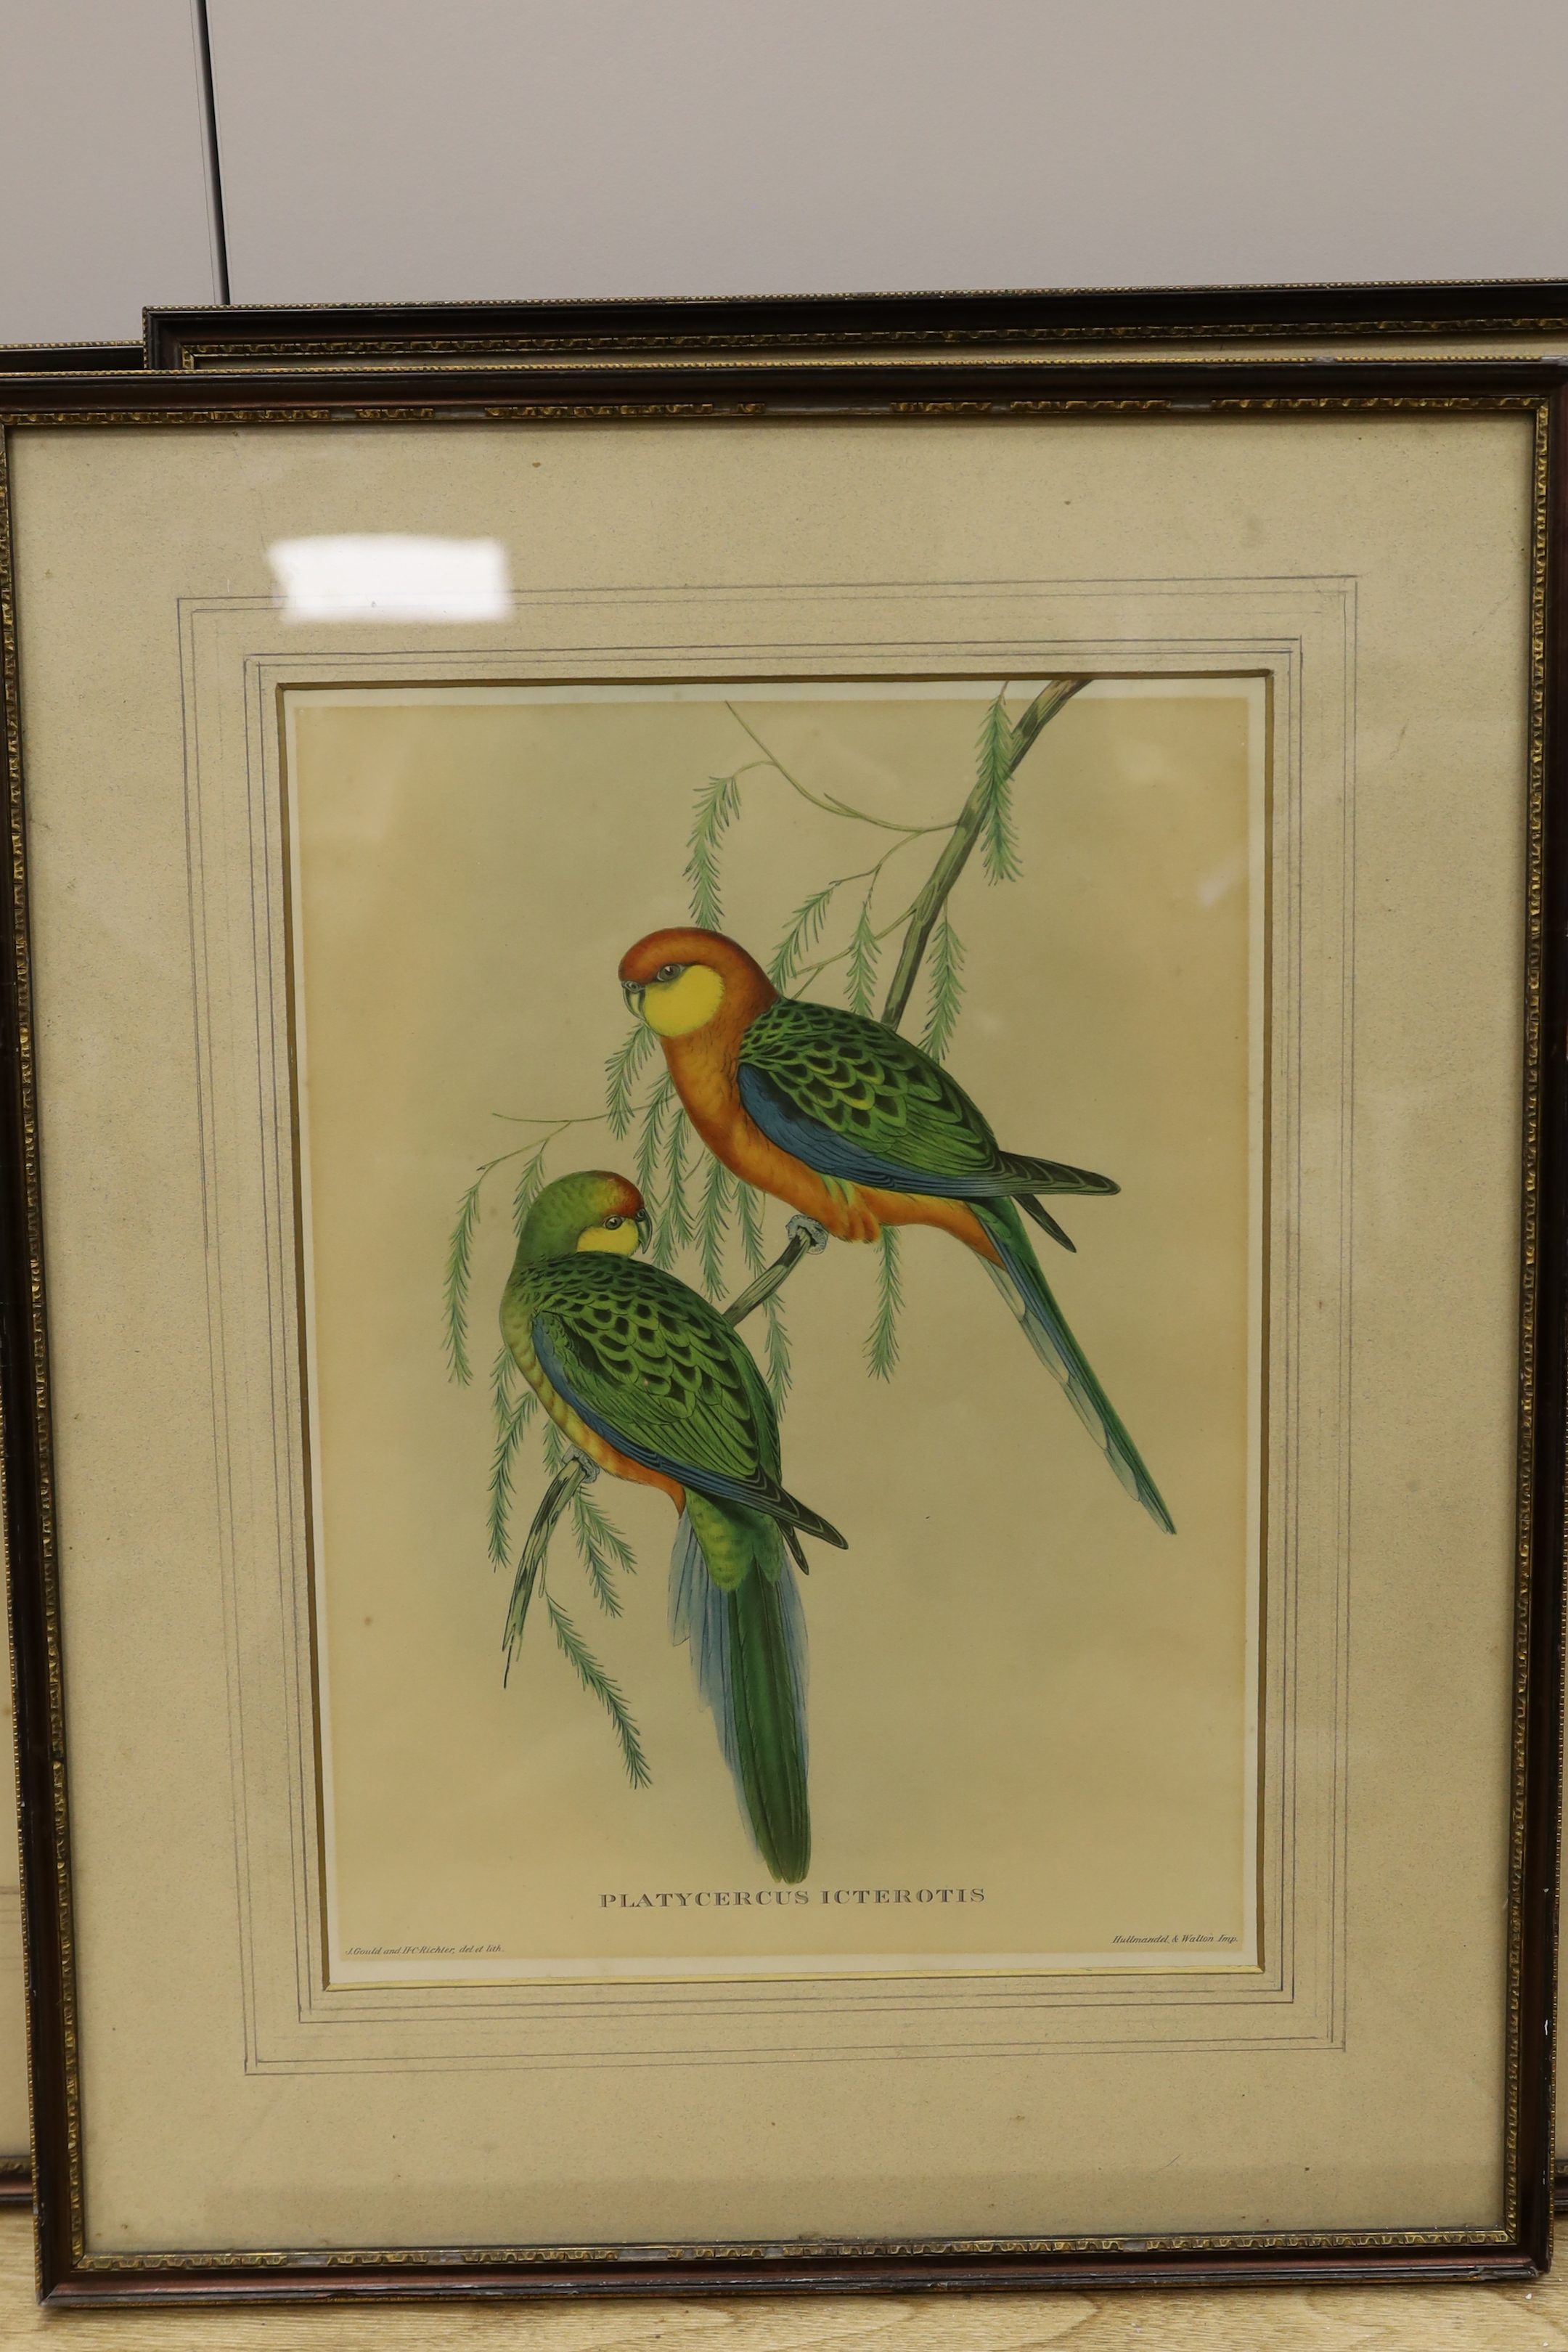 After J Gould (1804-1881) and H. C. Richter (1821-1902), set of five zoological colour lithographs, Birds including Trogon Collaris and Euspiza Luteola, each 37 x 27cm